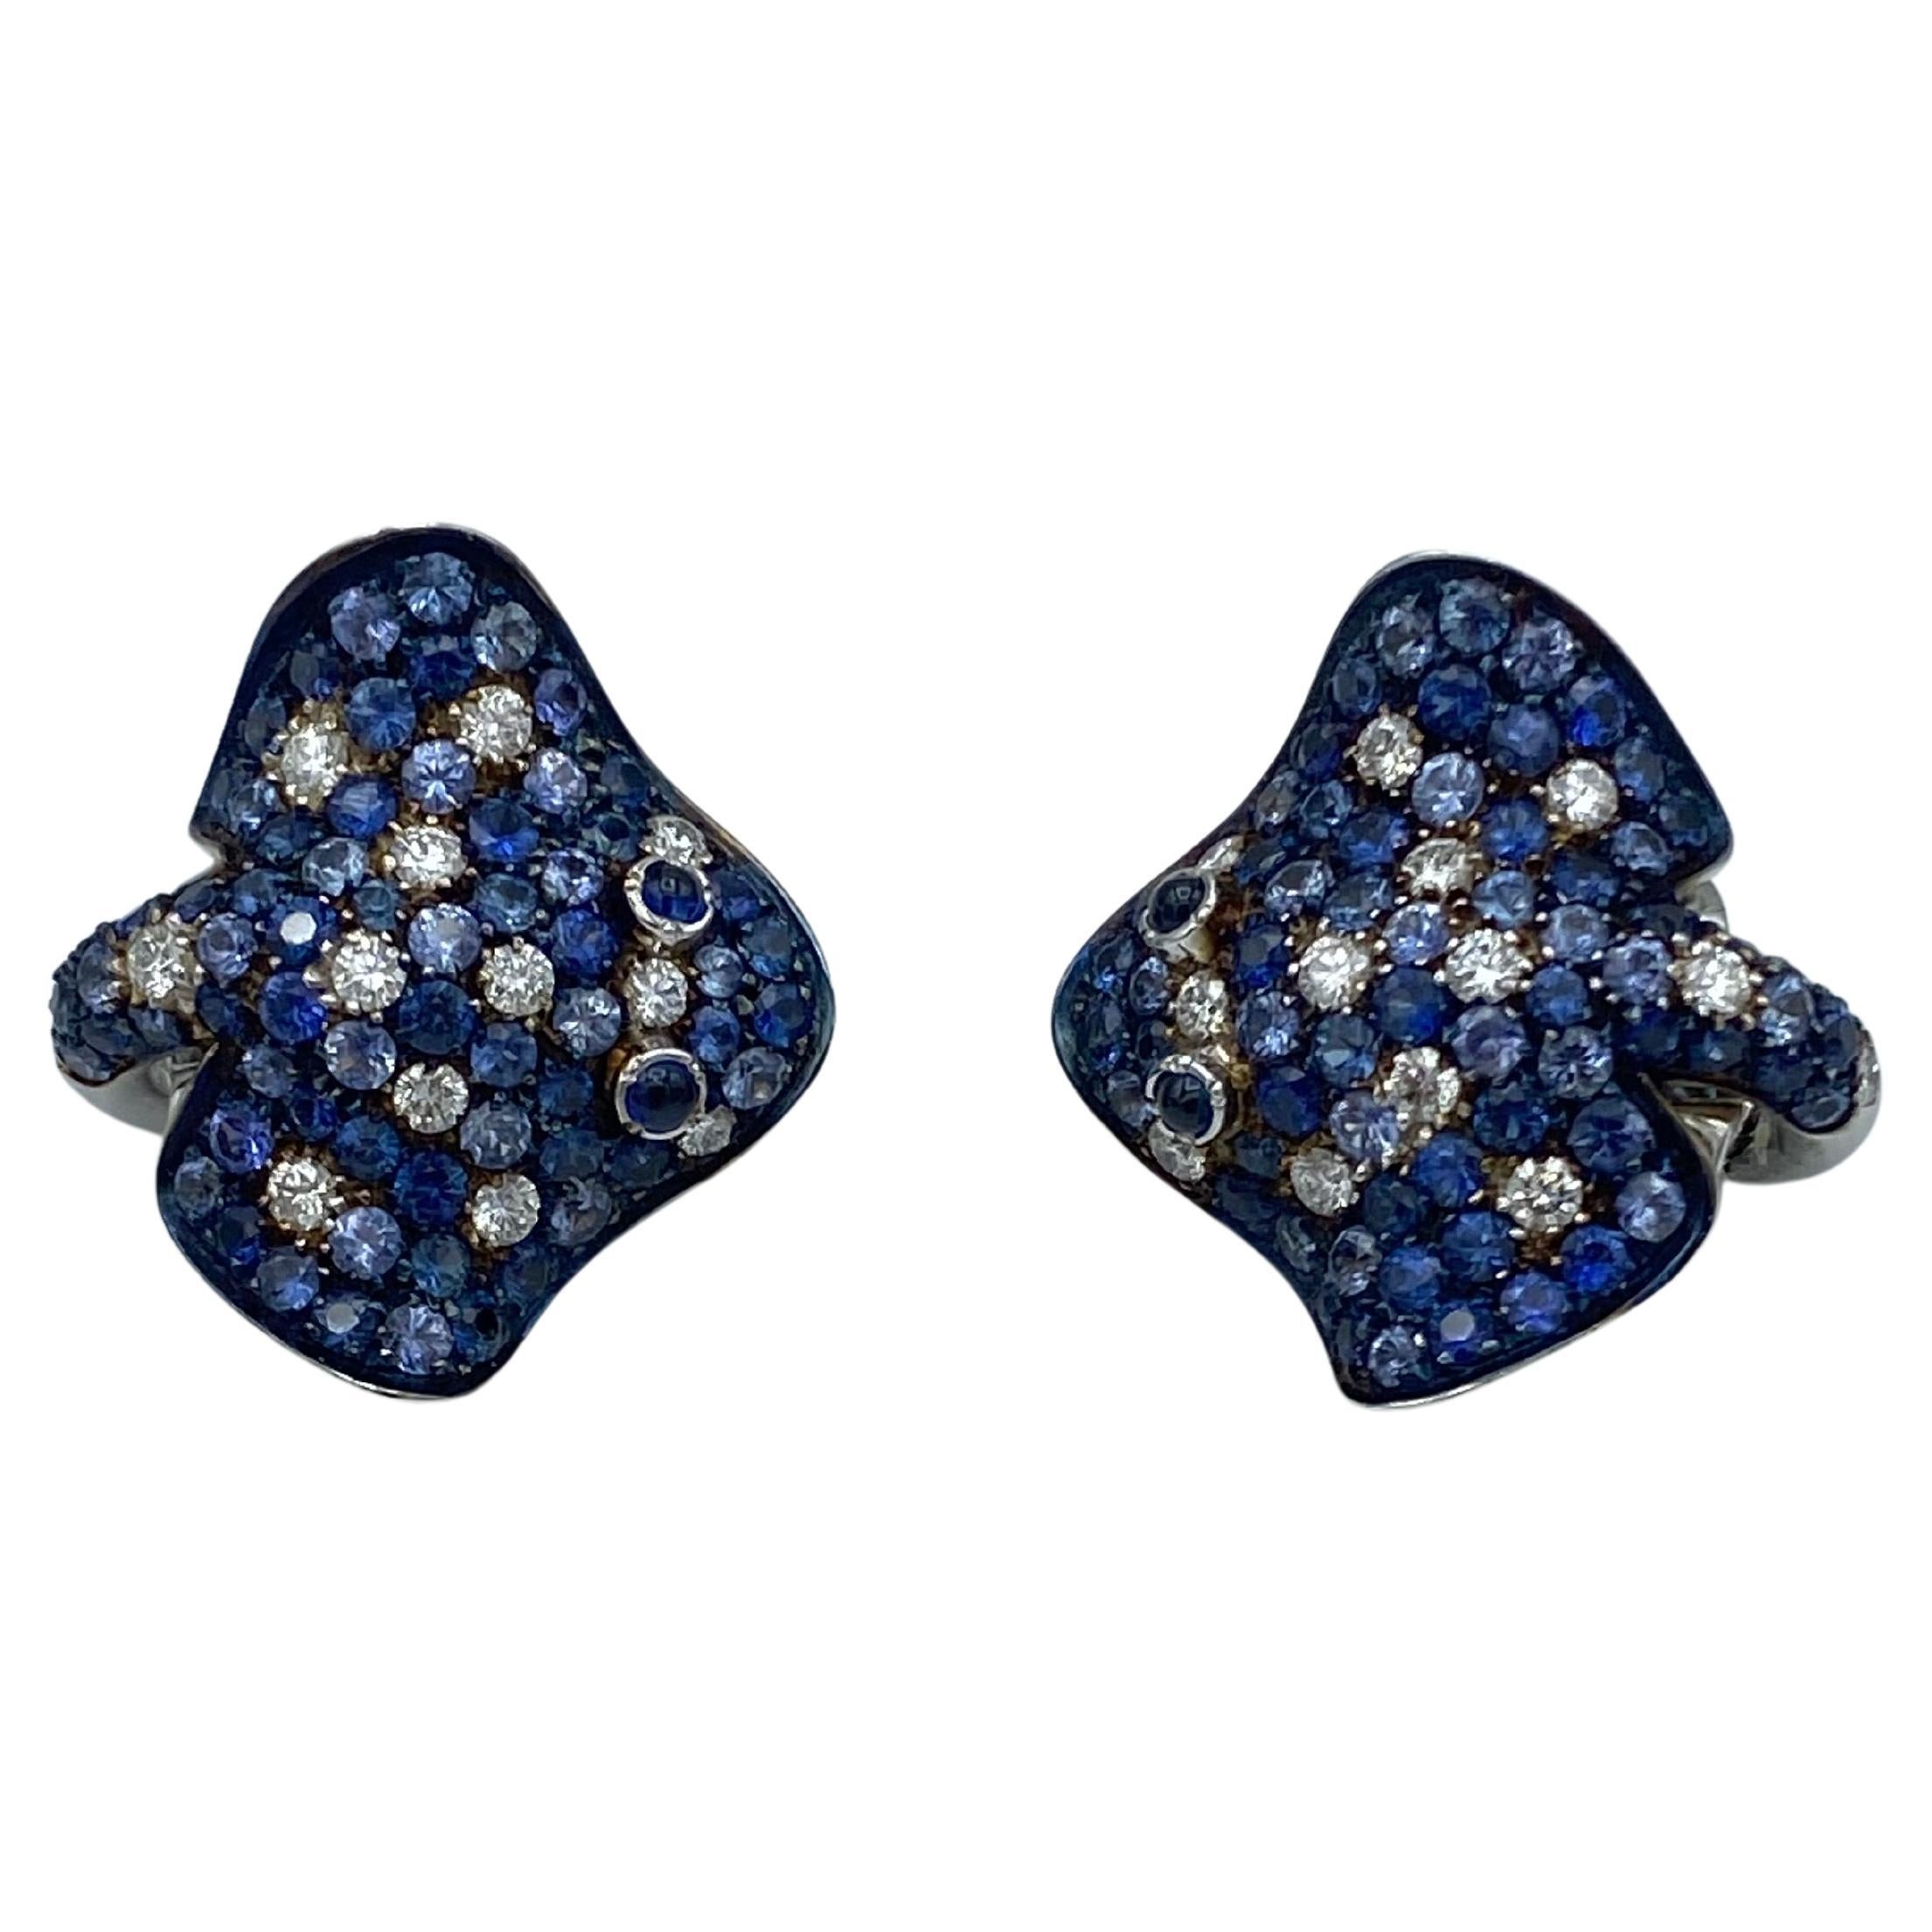 Petronilla Ray Fish White Diamond Blue Sapphire 18Kt Gold Made in Italy Earrings